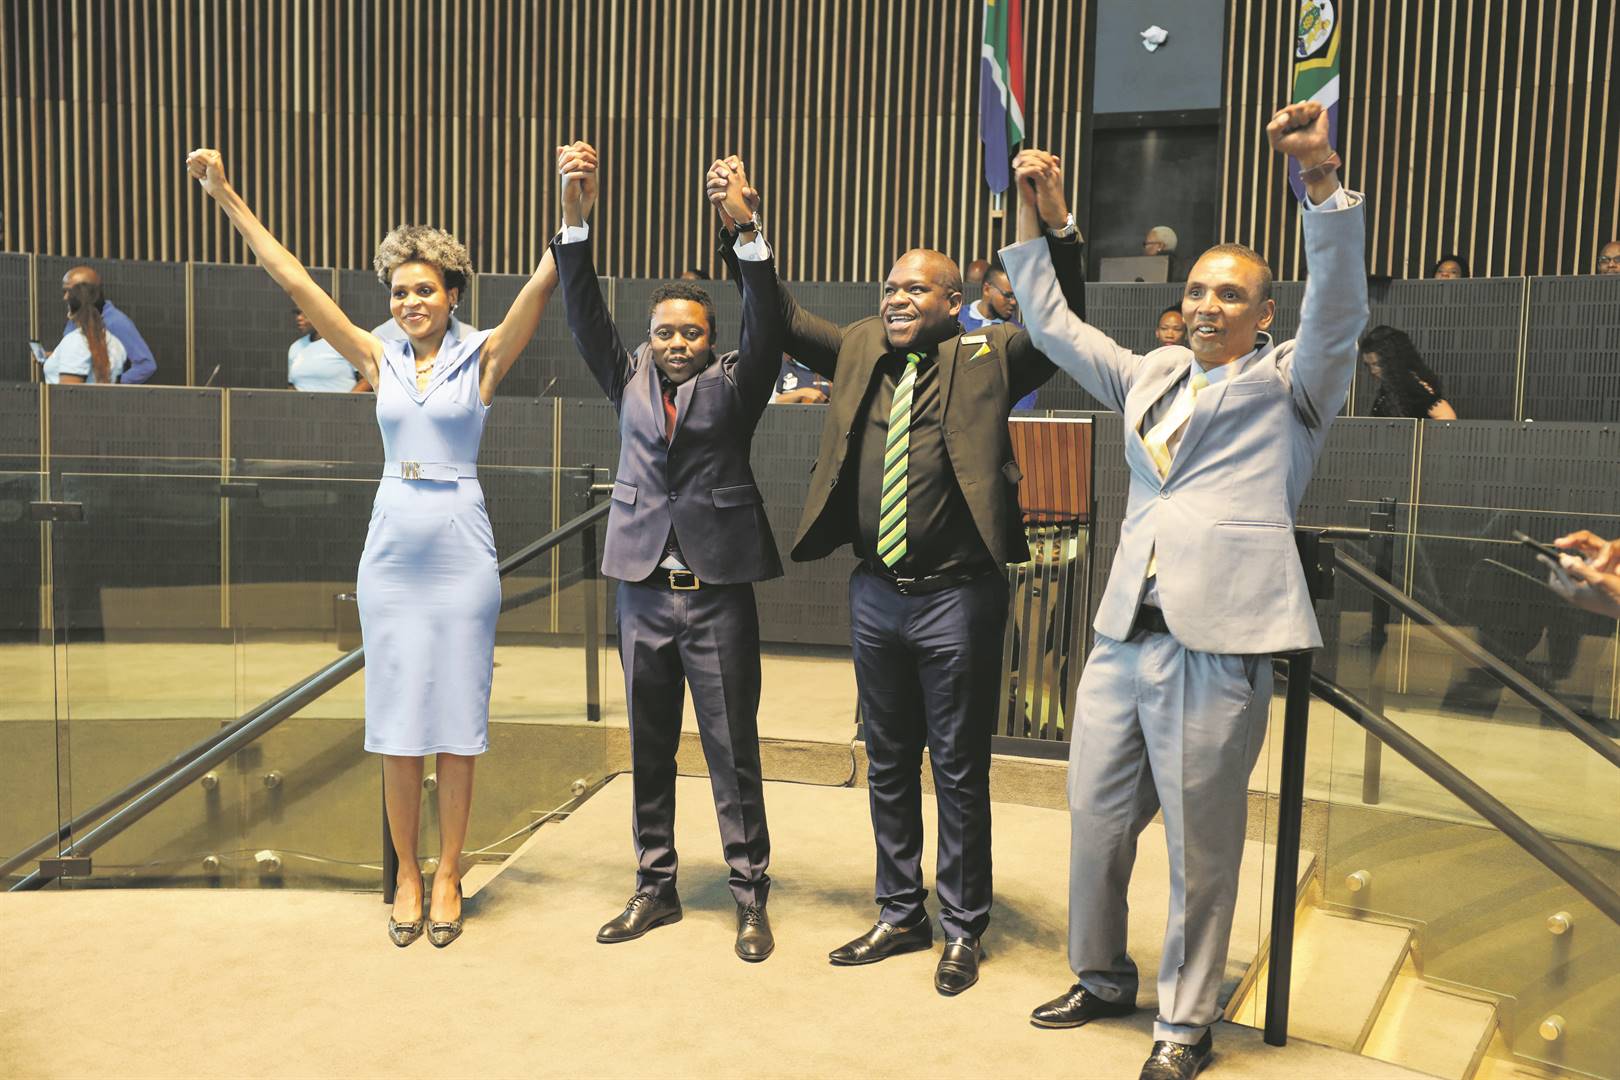 Al Jama-ah's Thapelo Amad (second from left) was elected as Johannesburg's new mayor with the support of the ANC and the EFF. Speaker Colleen Makhubele (Cope), chief whip Sithembiso Zungu (ANC) and chair of chairs Lloyd Phillips (Good) celebrated with him.